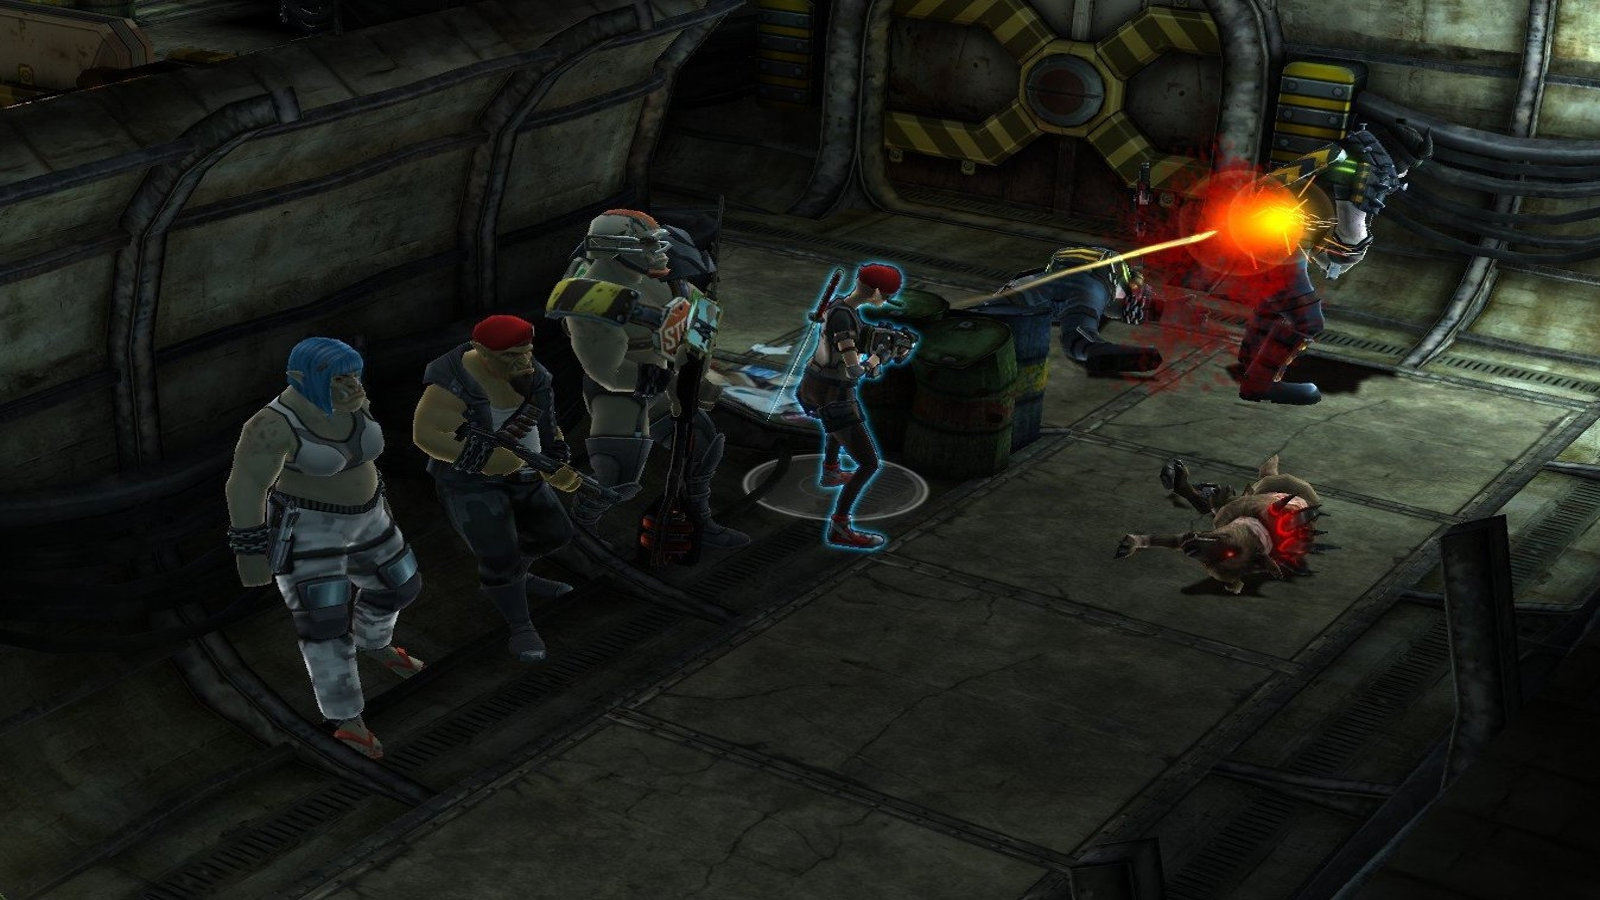 Shadowrun Online now being published by Nordic Games